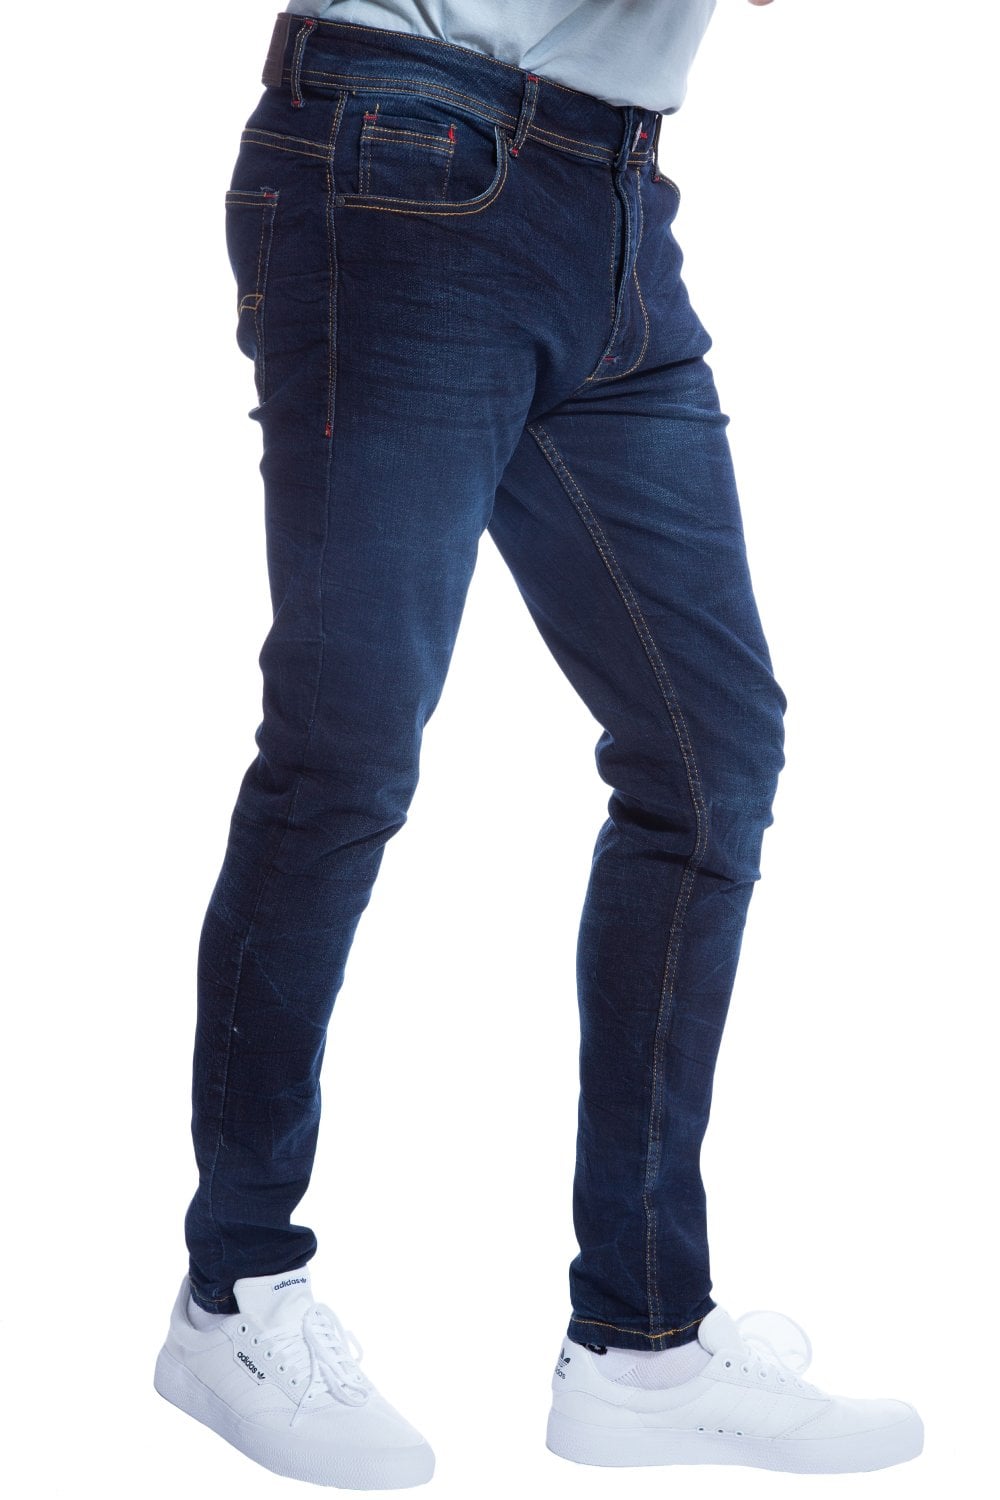 Slim Fit Jeans - Twisted Soul | Men's Clothing